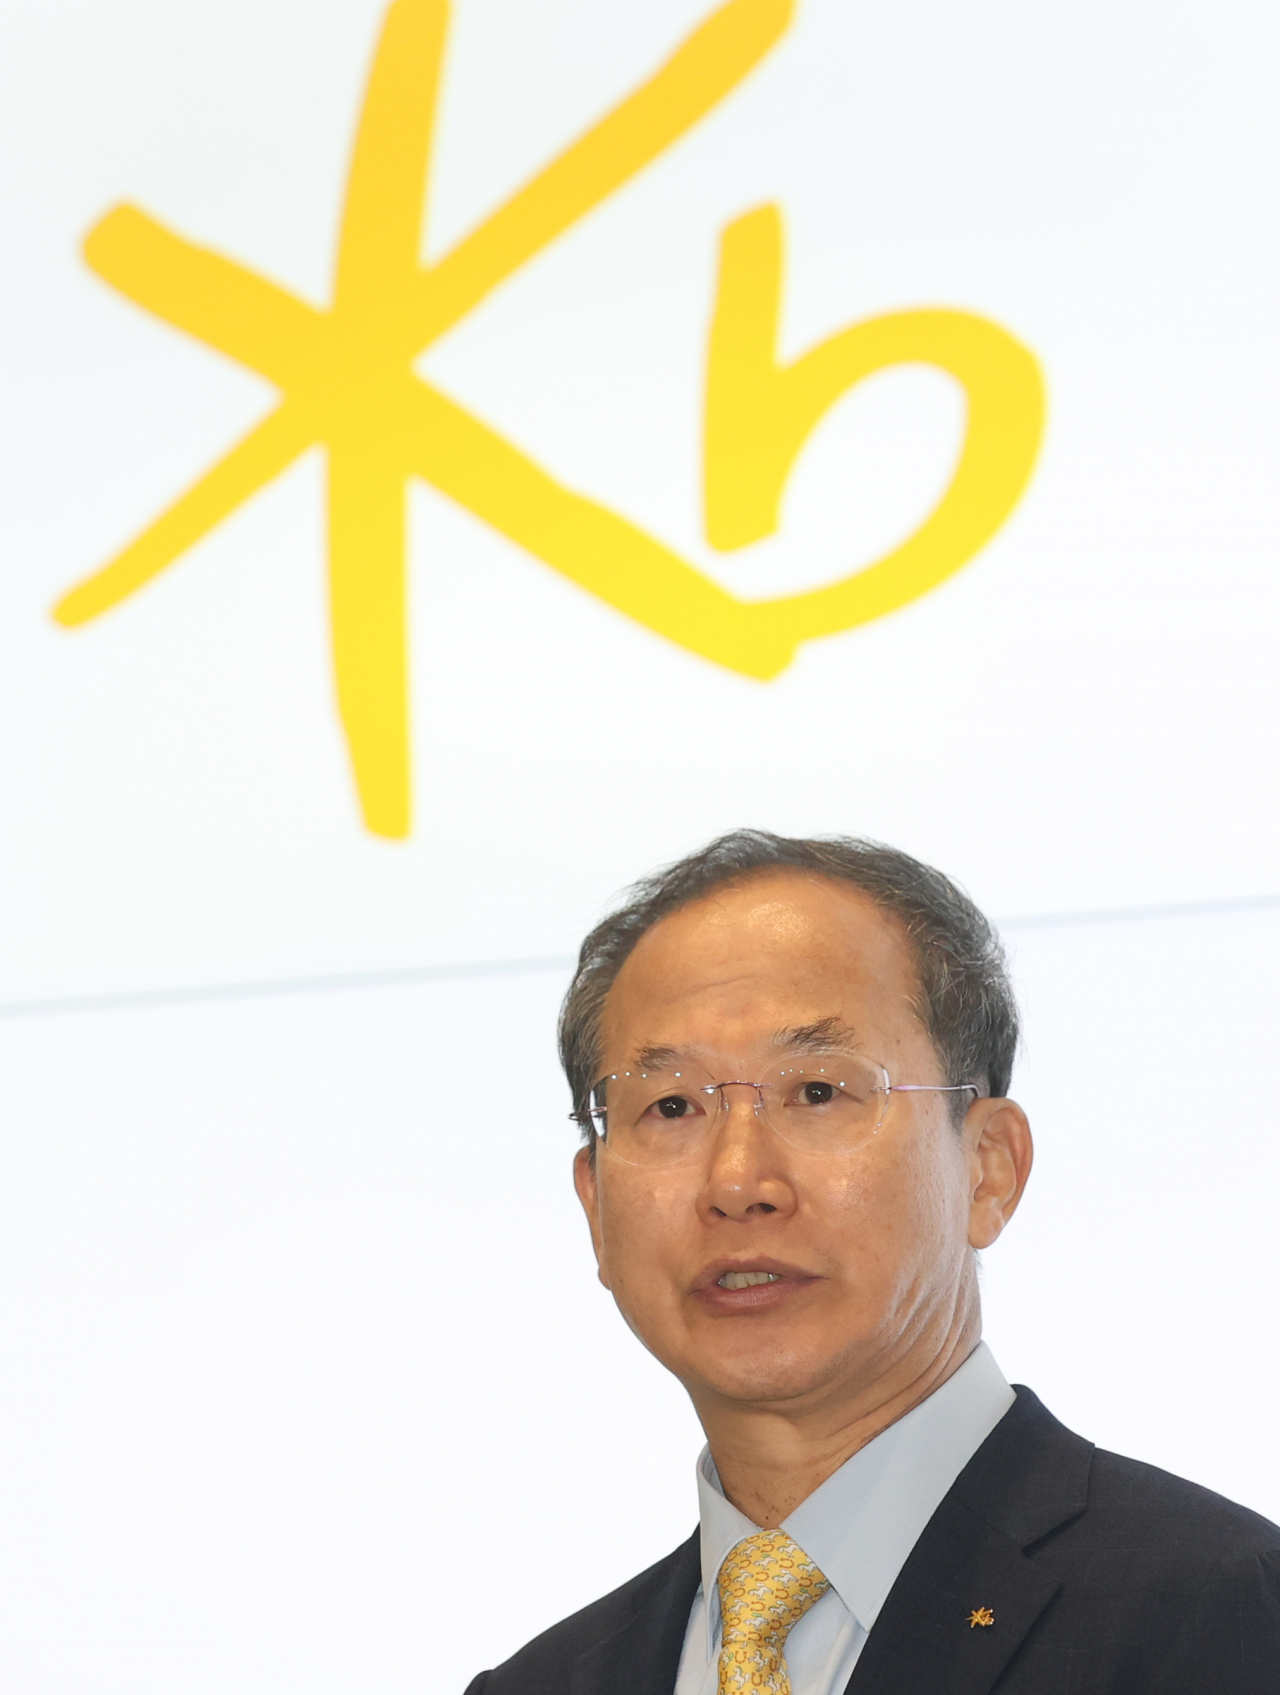 Yang Jong-hee, the vice chairman and candidate for the next chairman of KB Financial Group talks to local reporters at the group's headquarters in Seoul on Sept. 11. (Newsis)